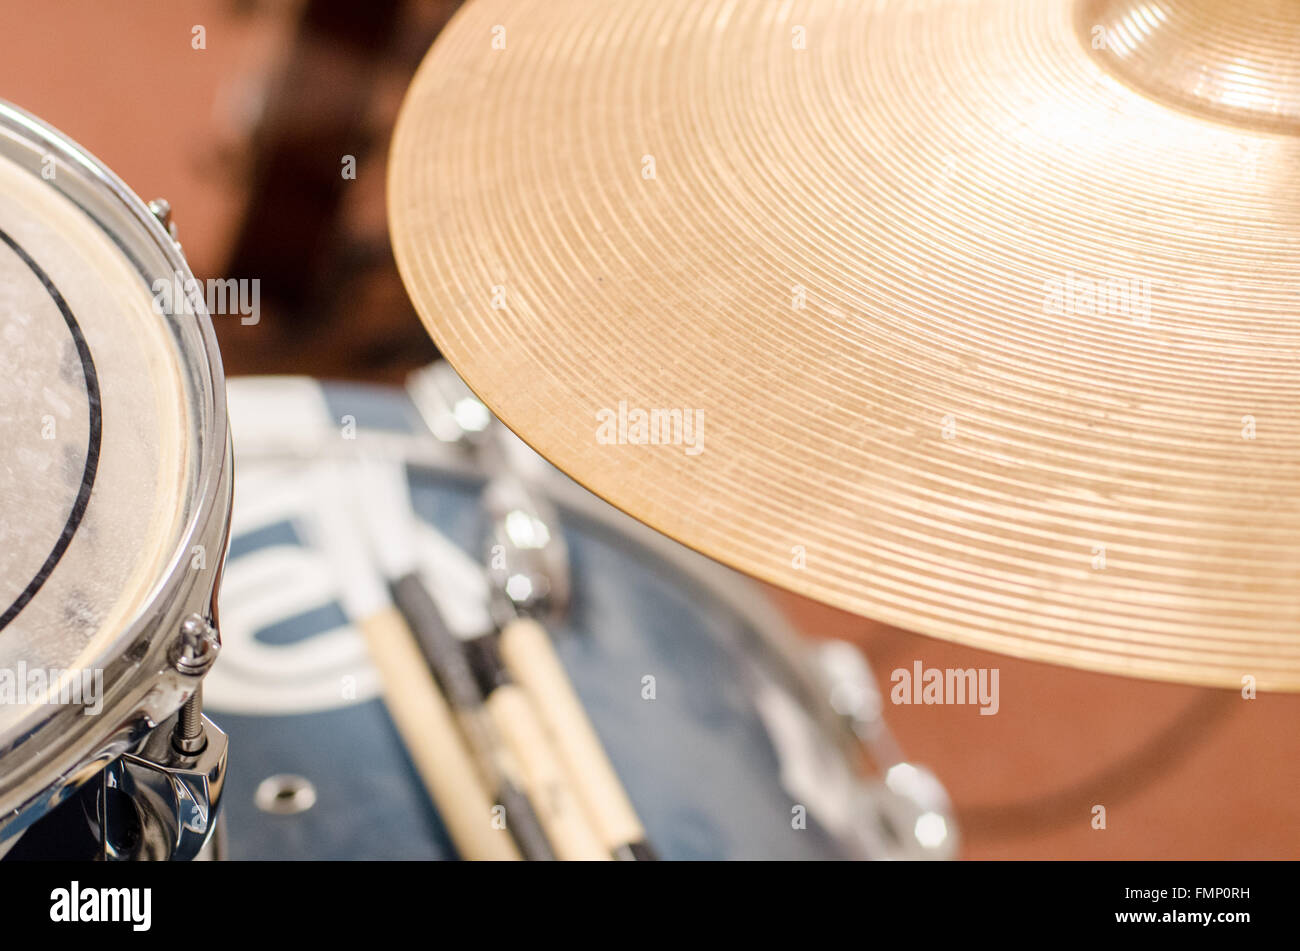 detail of drum set and sticks in rehearsing room Stock Photo